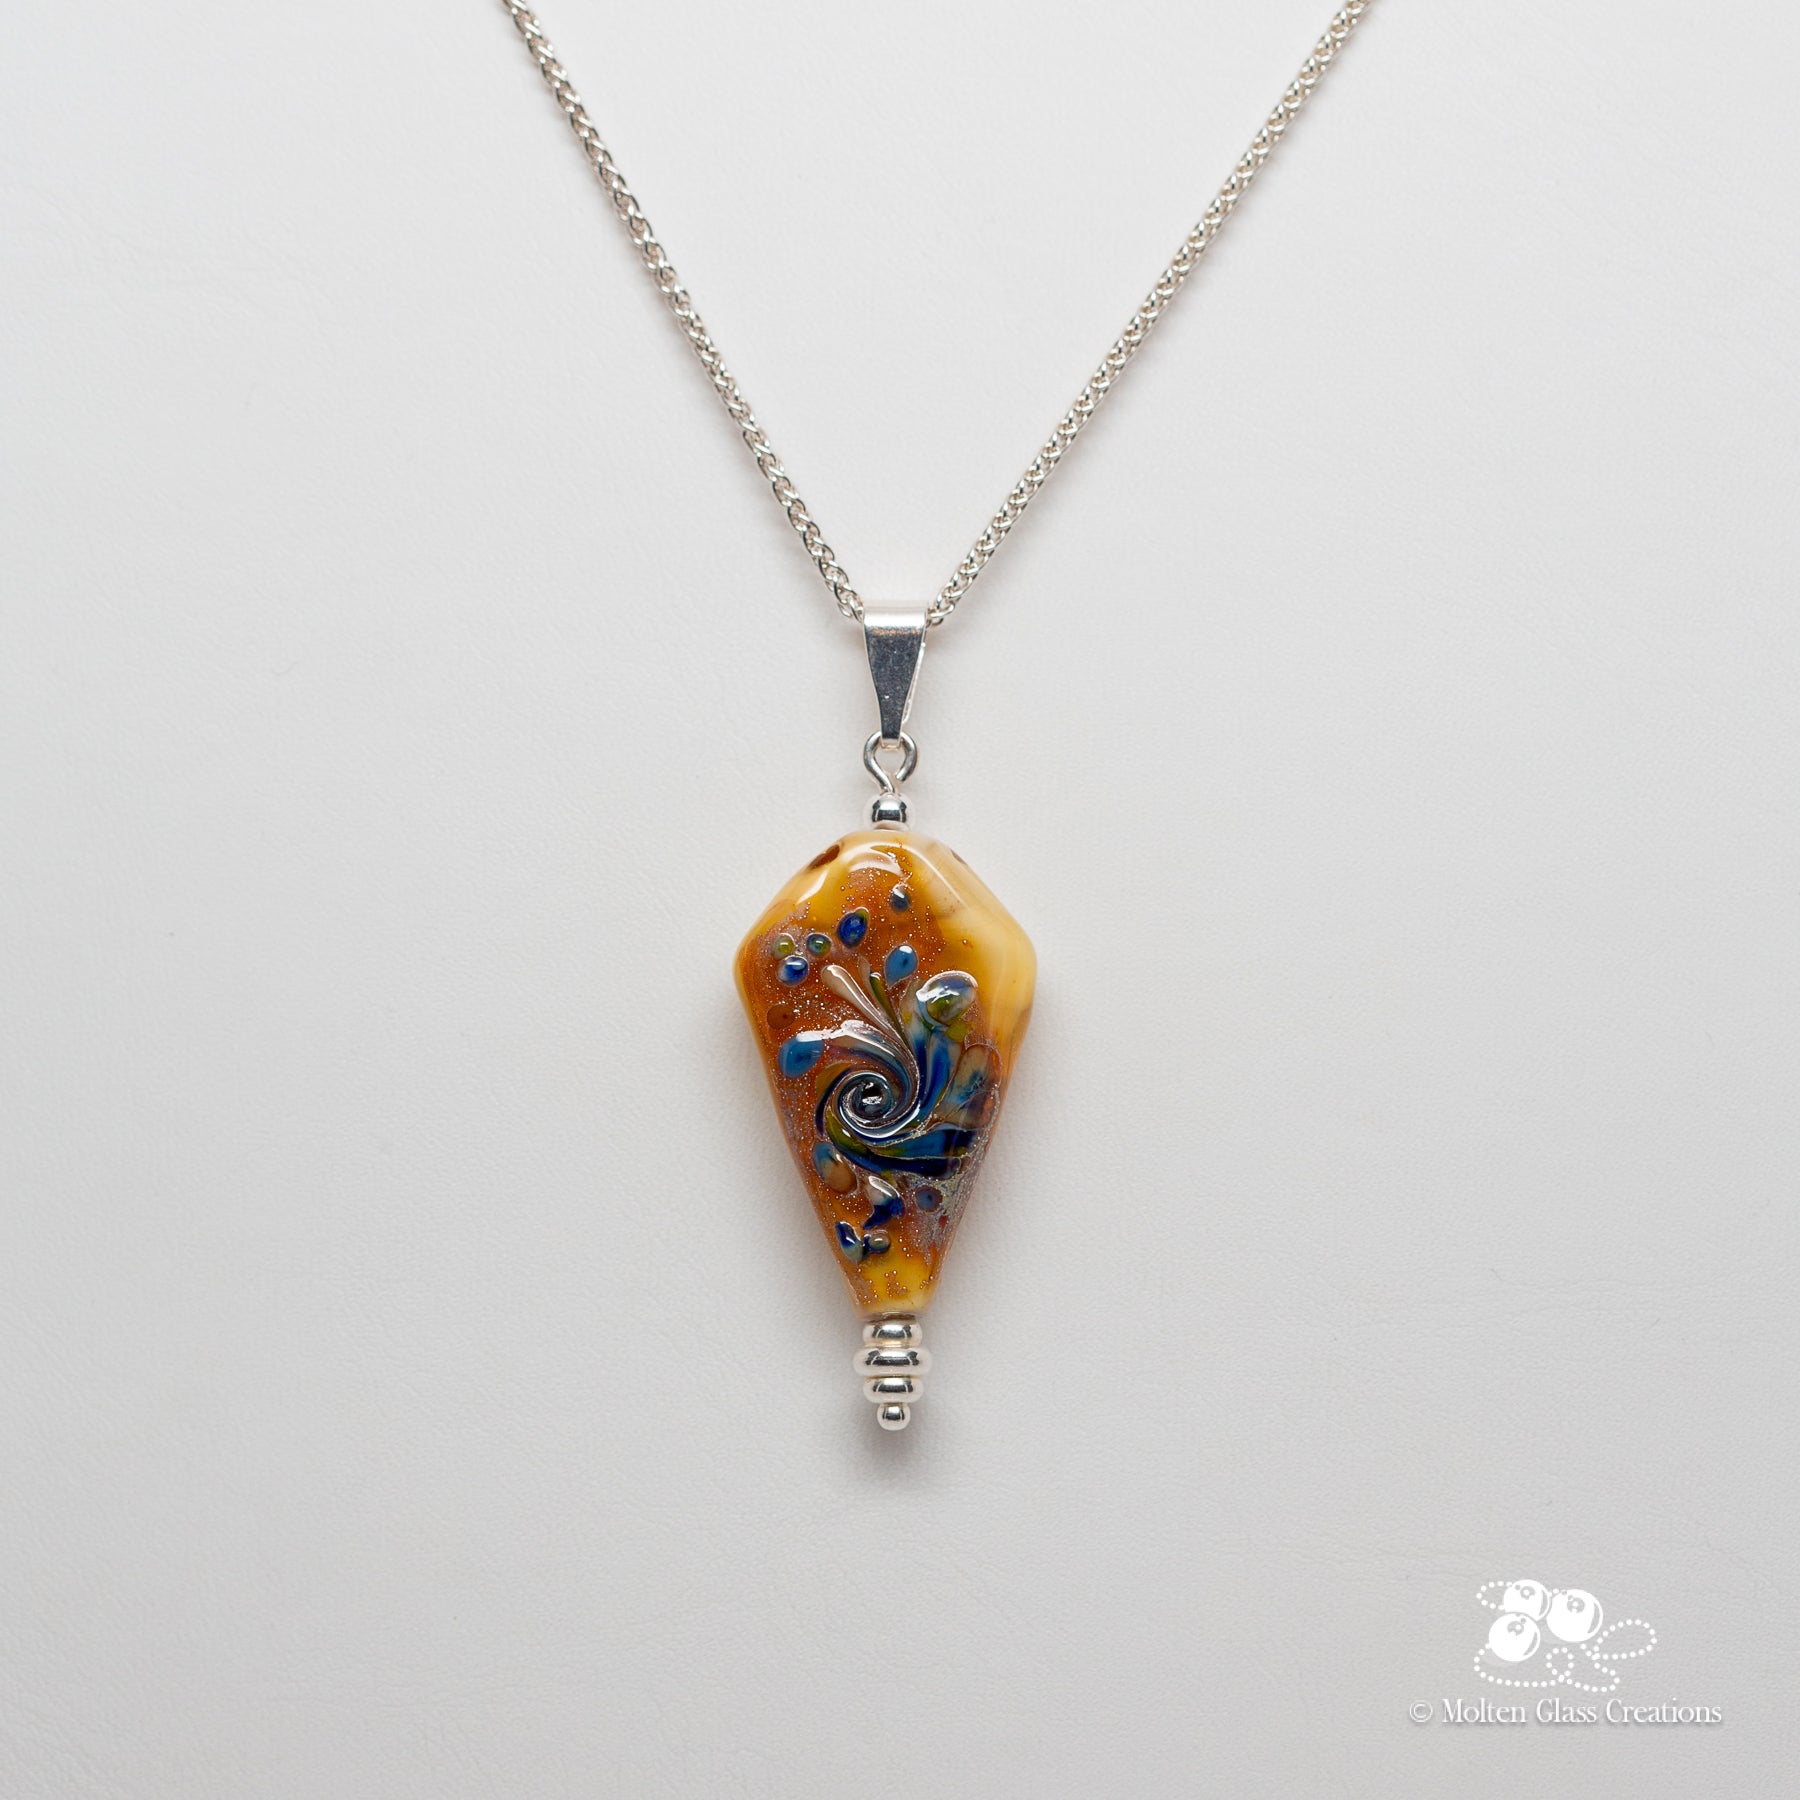 Fly a Kite - Yellow Necklace - Molten Glass Creations